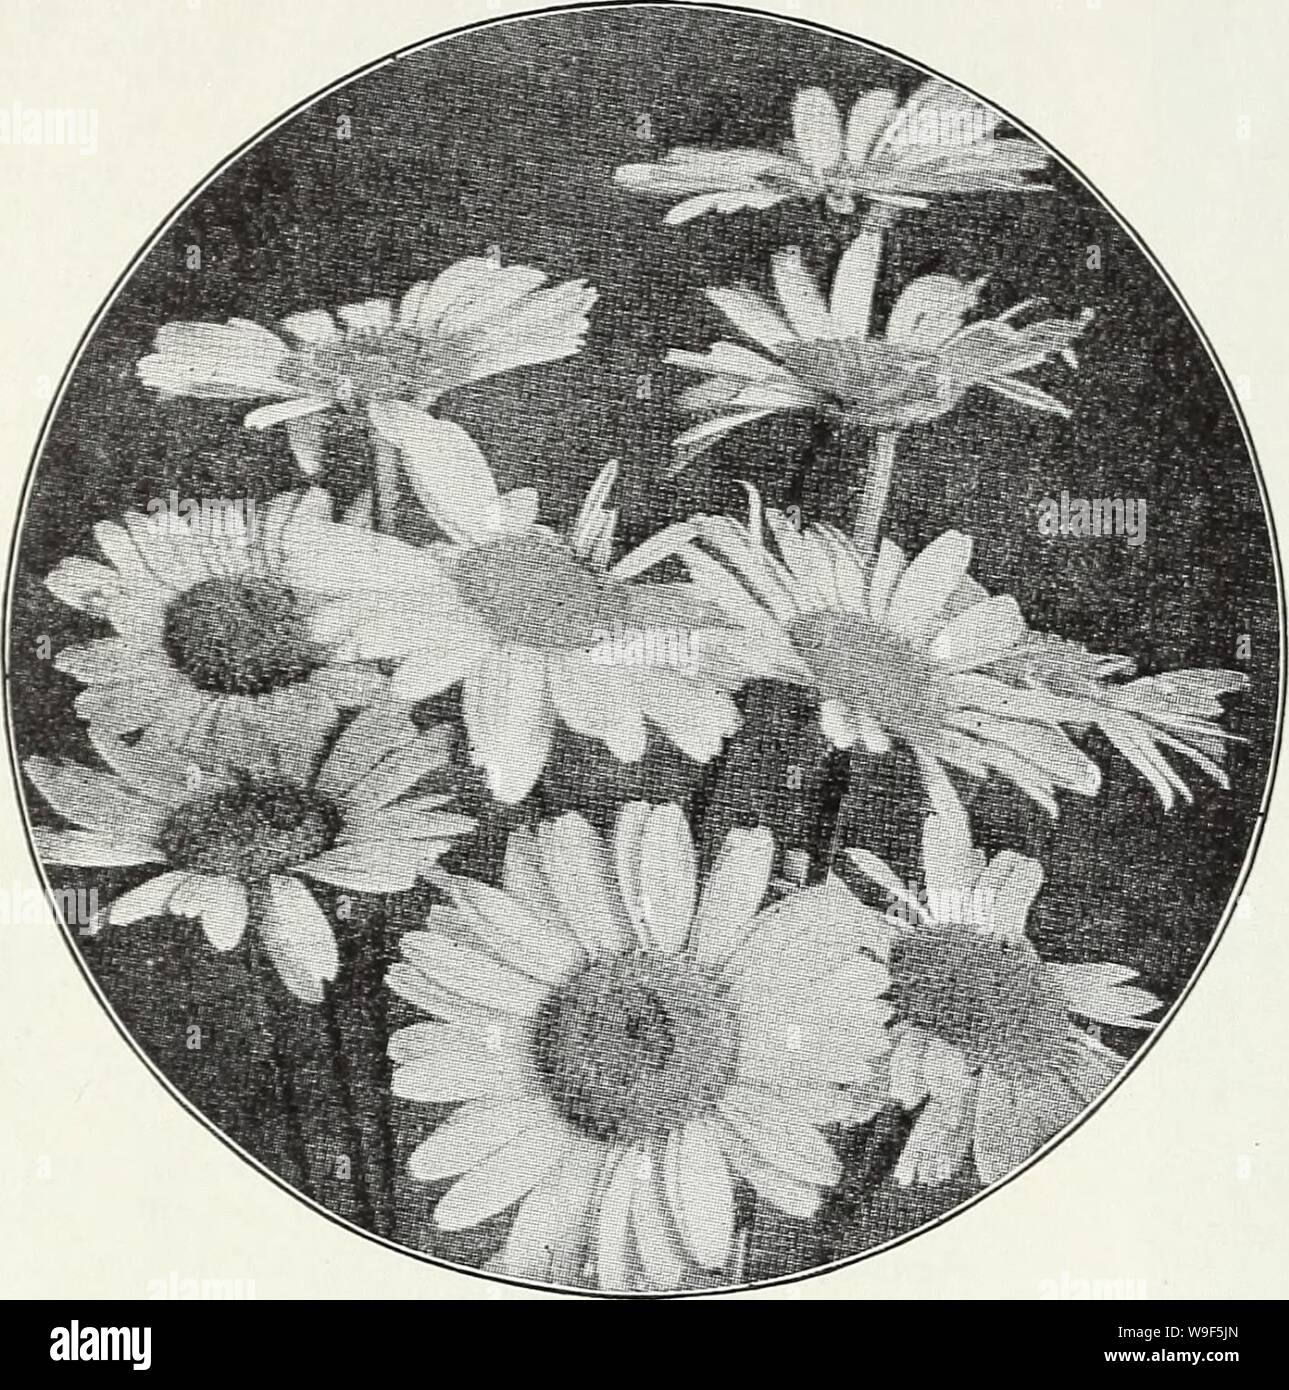 Archive image from page 17 of Currie's bulbs and plants . Currie's bulbs and plants : autumn 1928  curriesbulbsplan19curr Year: 1928 ( 16 A. Currie & Co., Bulbs and Plants Hardy Perennial Plants Add for Postage if ordered by Parcel Post.    ACHILLEA (Milfoil or Yarrow) Bears dense heads of pink flowers all Flowers double white, borne in Millefolium Rosea summer. Ptanuica fl. pi. 'The Pearl' — great profusion all season. Price, each, 25c; per dozen, $2.50. Antheiiiis Tinctoria ACONITU31 (3Ioukshood) Summer and fall flowering- hardy plants with bold spikes of hood-shaped flowers, thriving either Stock Photo